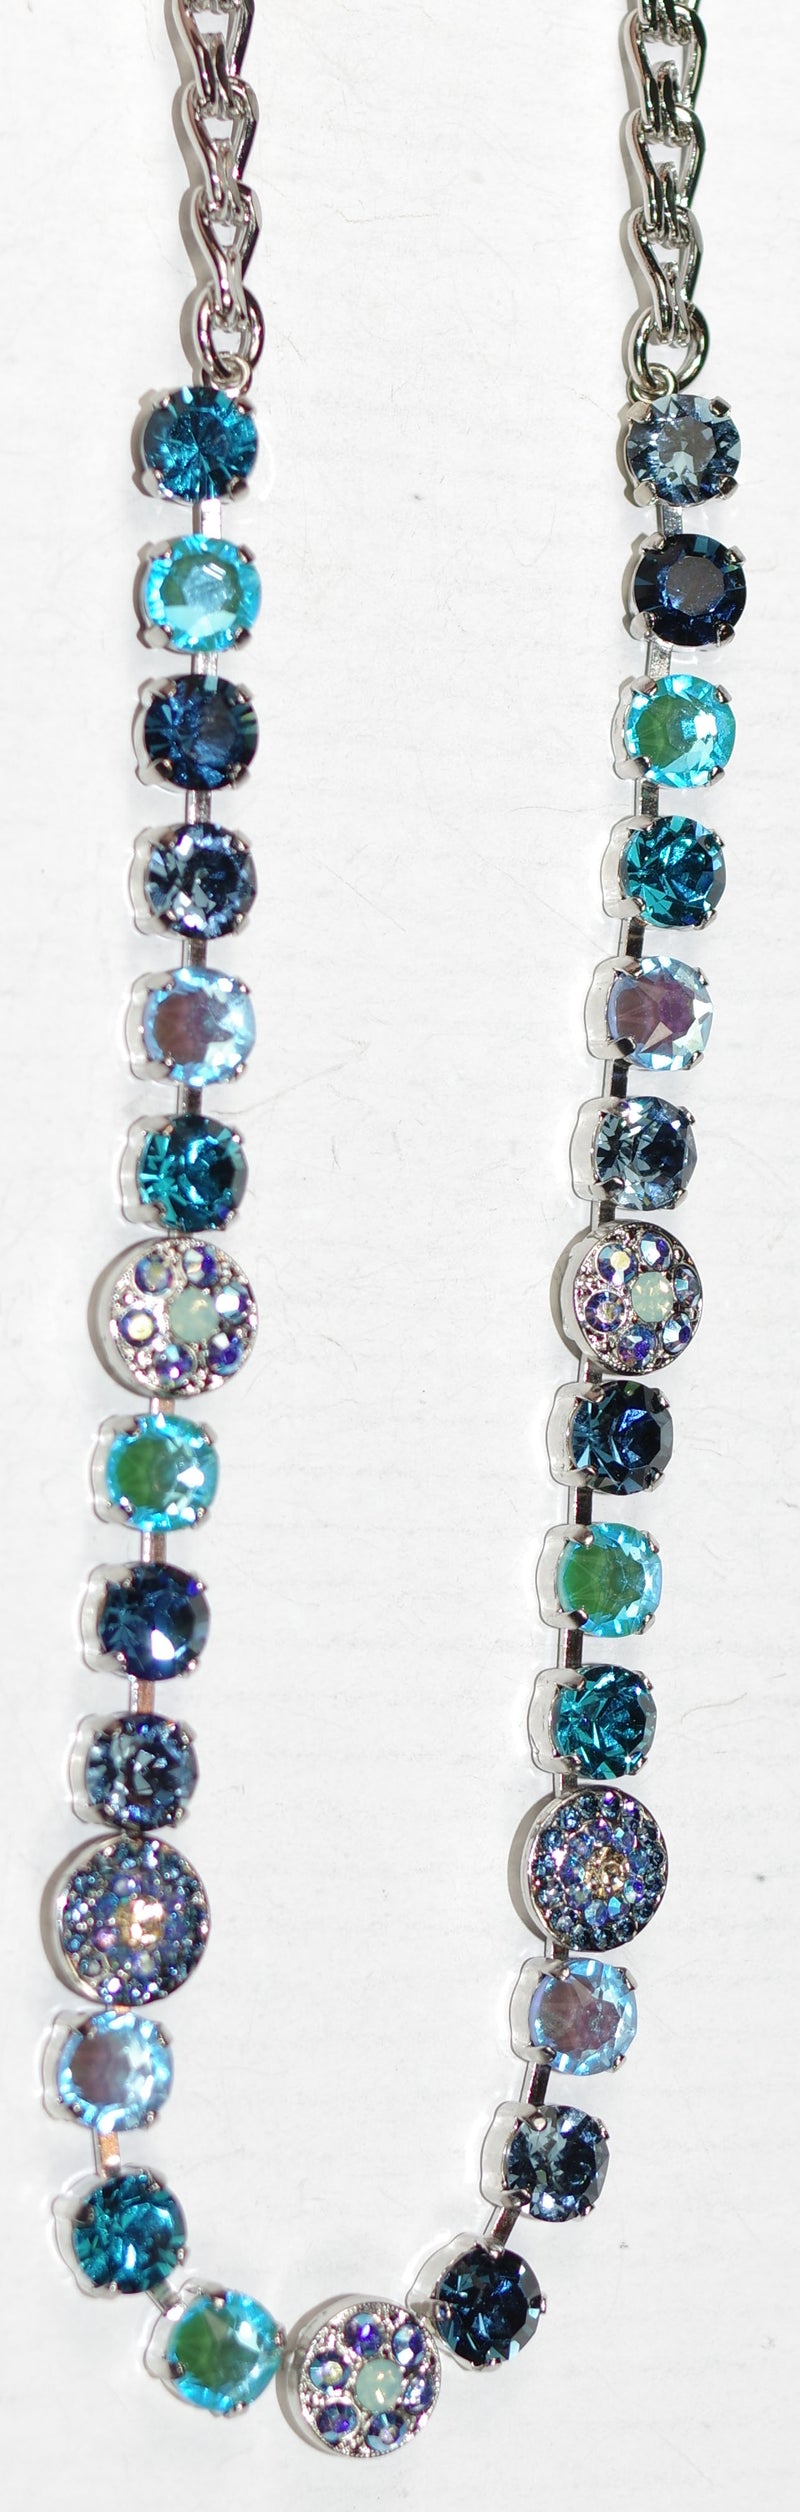 MARIANA NECKLACE FAIRYTALE: blue, navy teal, a/b stones in silver rhodium setting, 17" adjustable chain